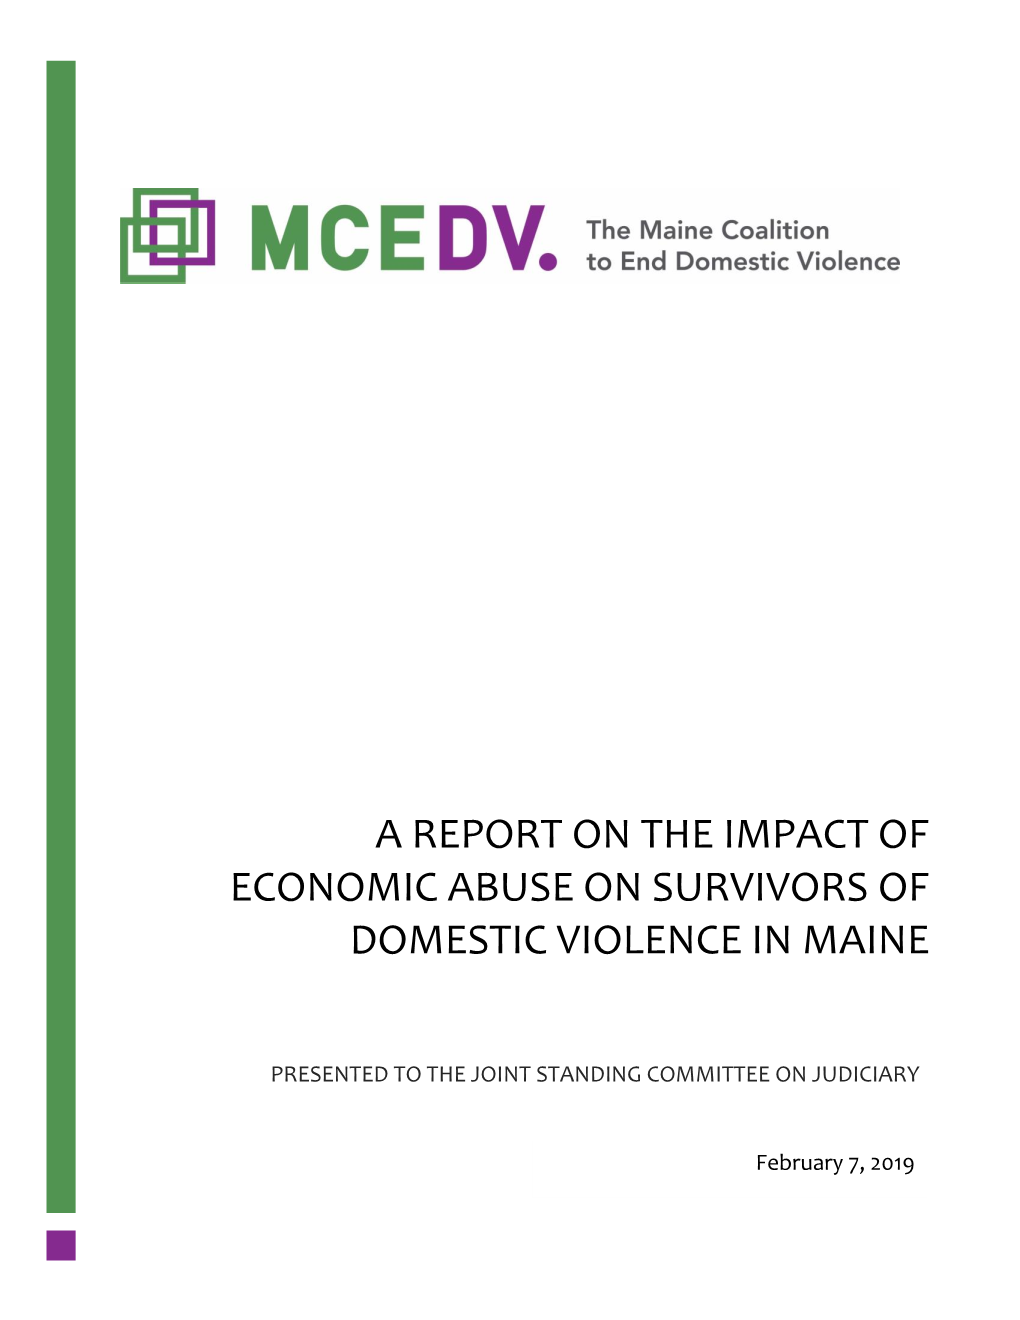 A Report on the Impact of Economic Abuse on Survivors of Domestic Violence in Maine